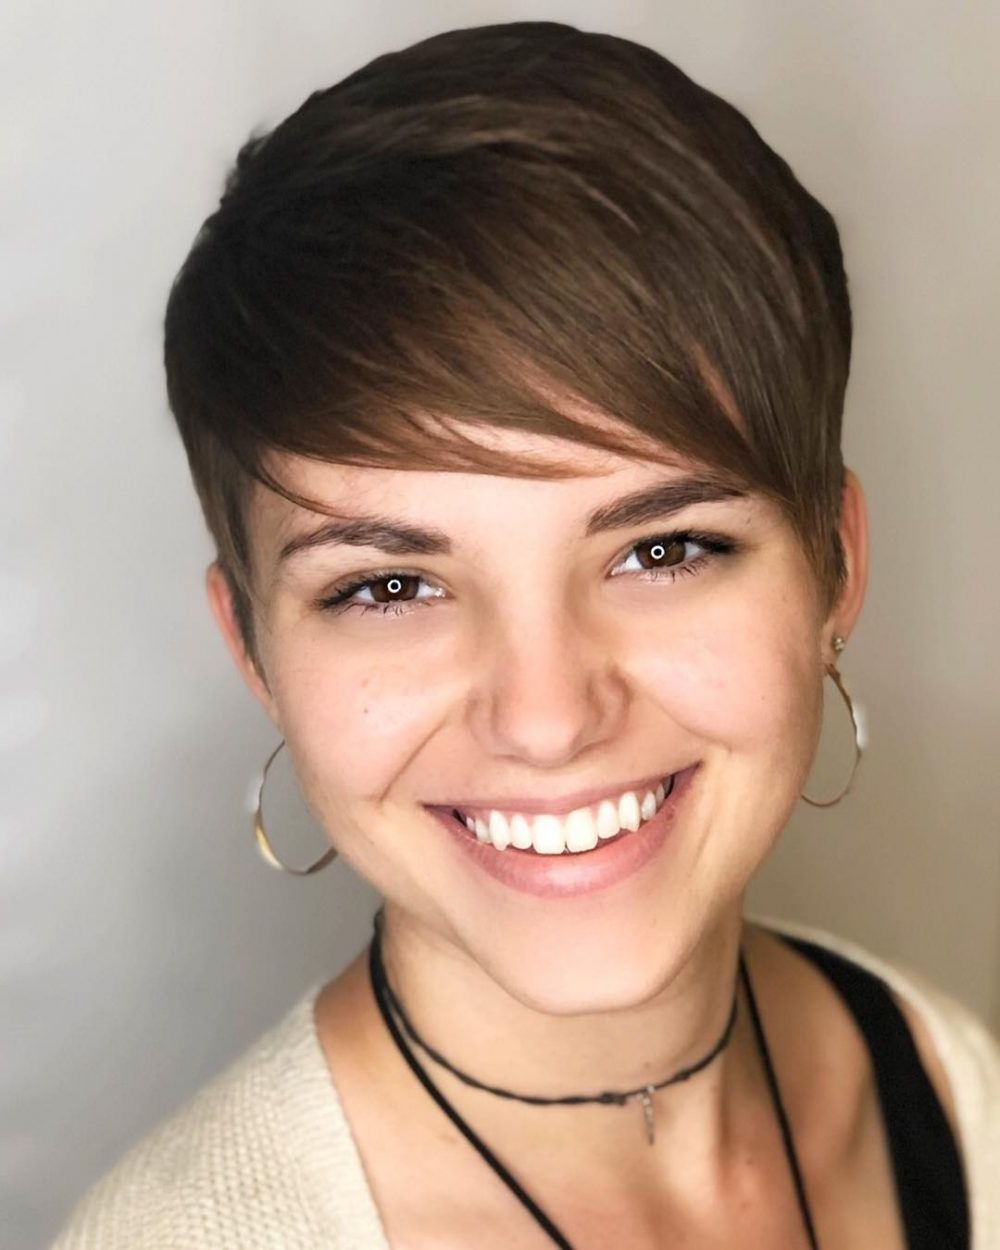 33 Flattering Short Hairstyles For Round Faces In 2018 With Regard To Pictures Of Short Hairstyles For Round Faces (View 4 of 25)